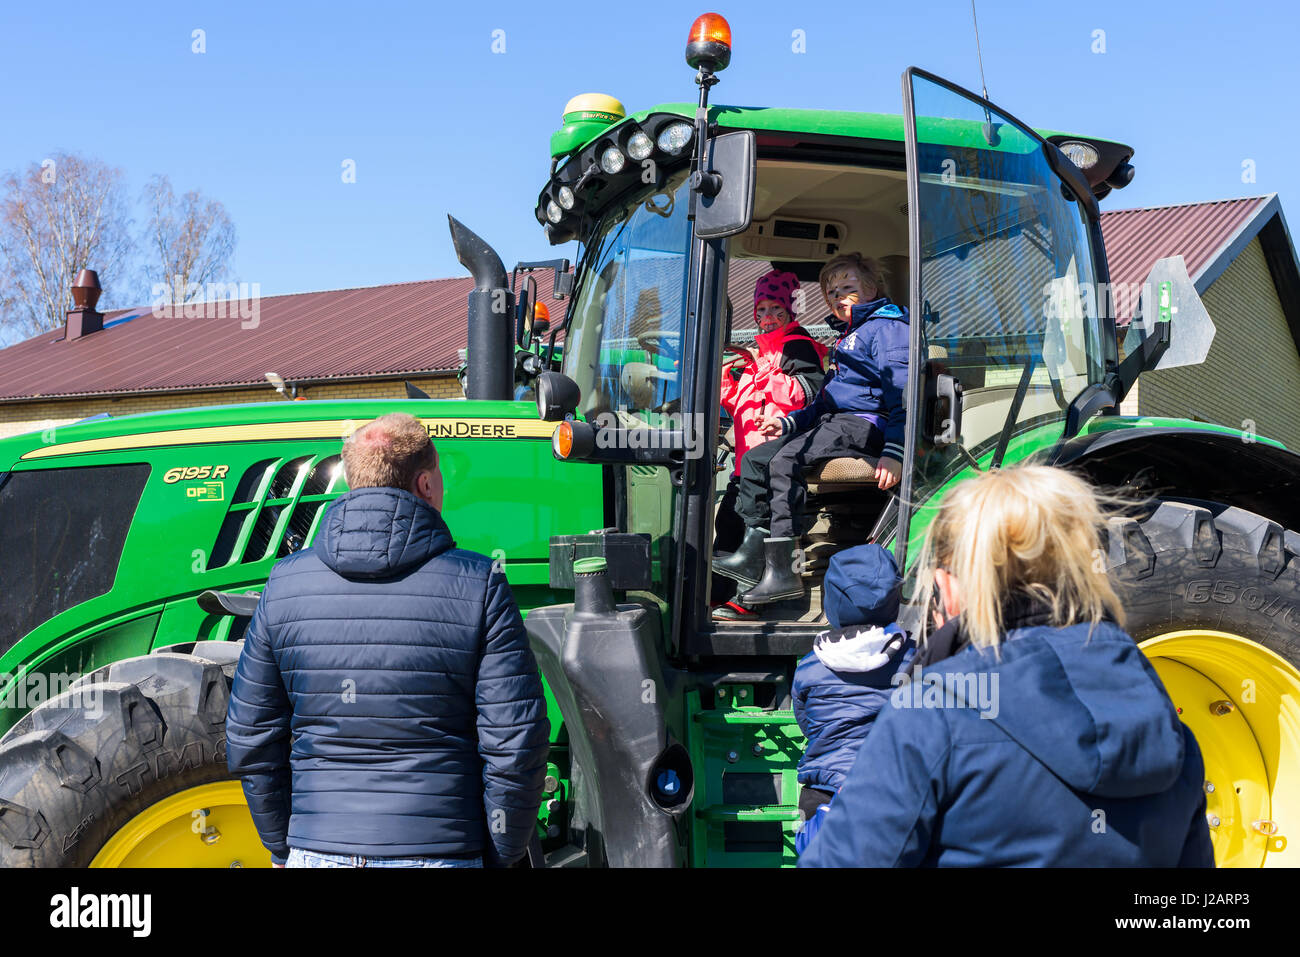 Brakne Hoby, Sweden - April 22, 2017: Documentary of small public farmers day. Children with painted faces sit inside a green John Deere tractor. Adul Stock Photo